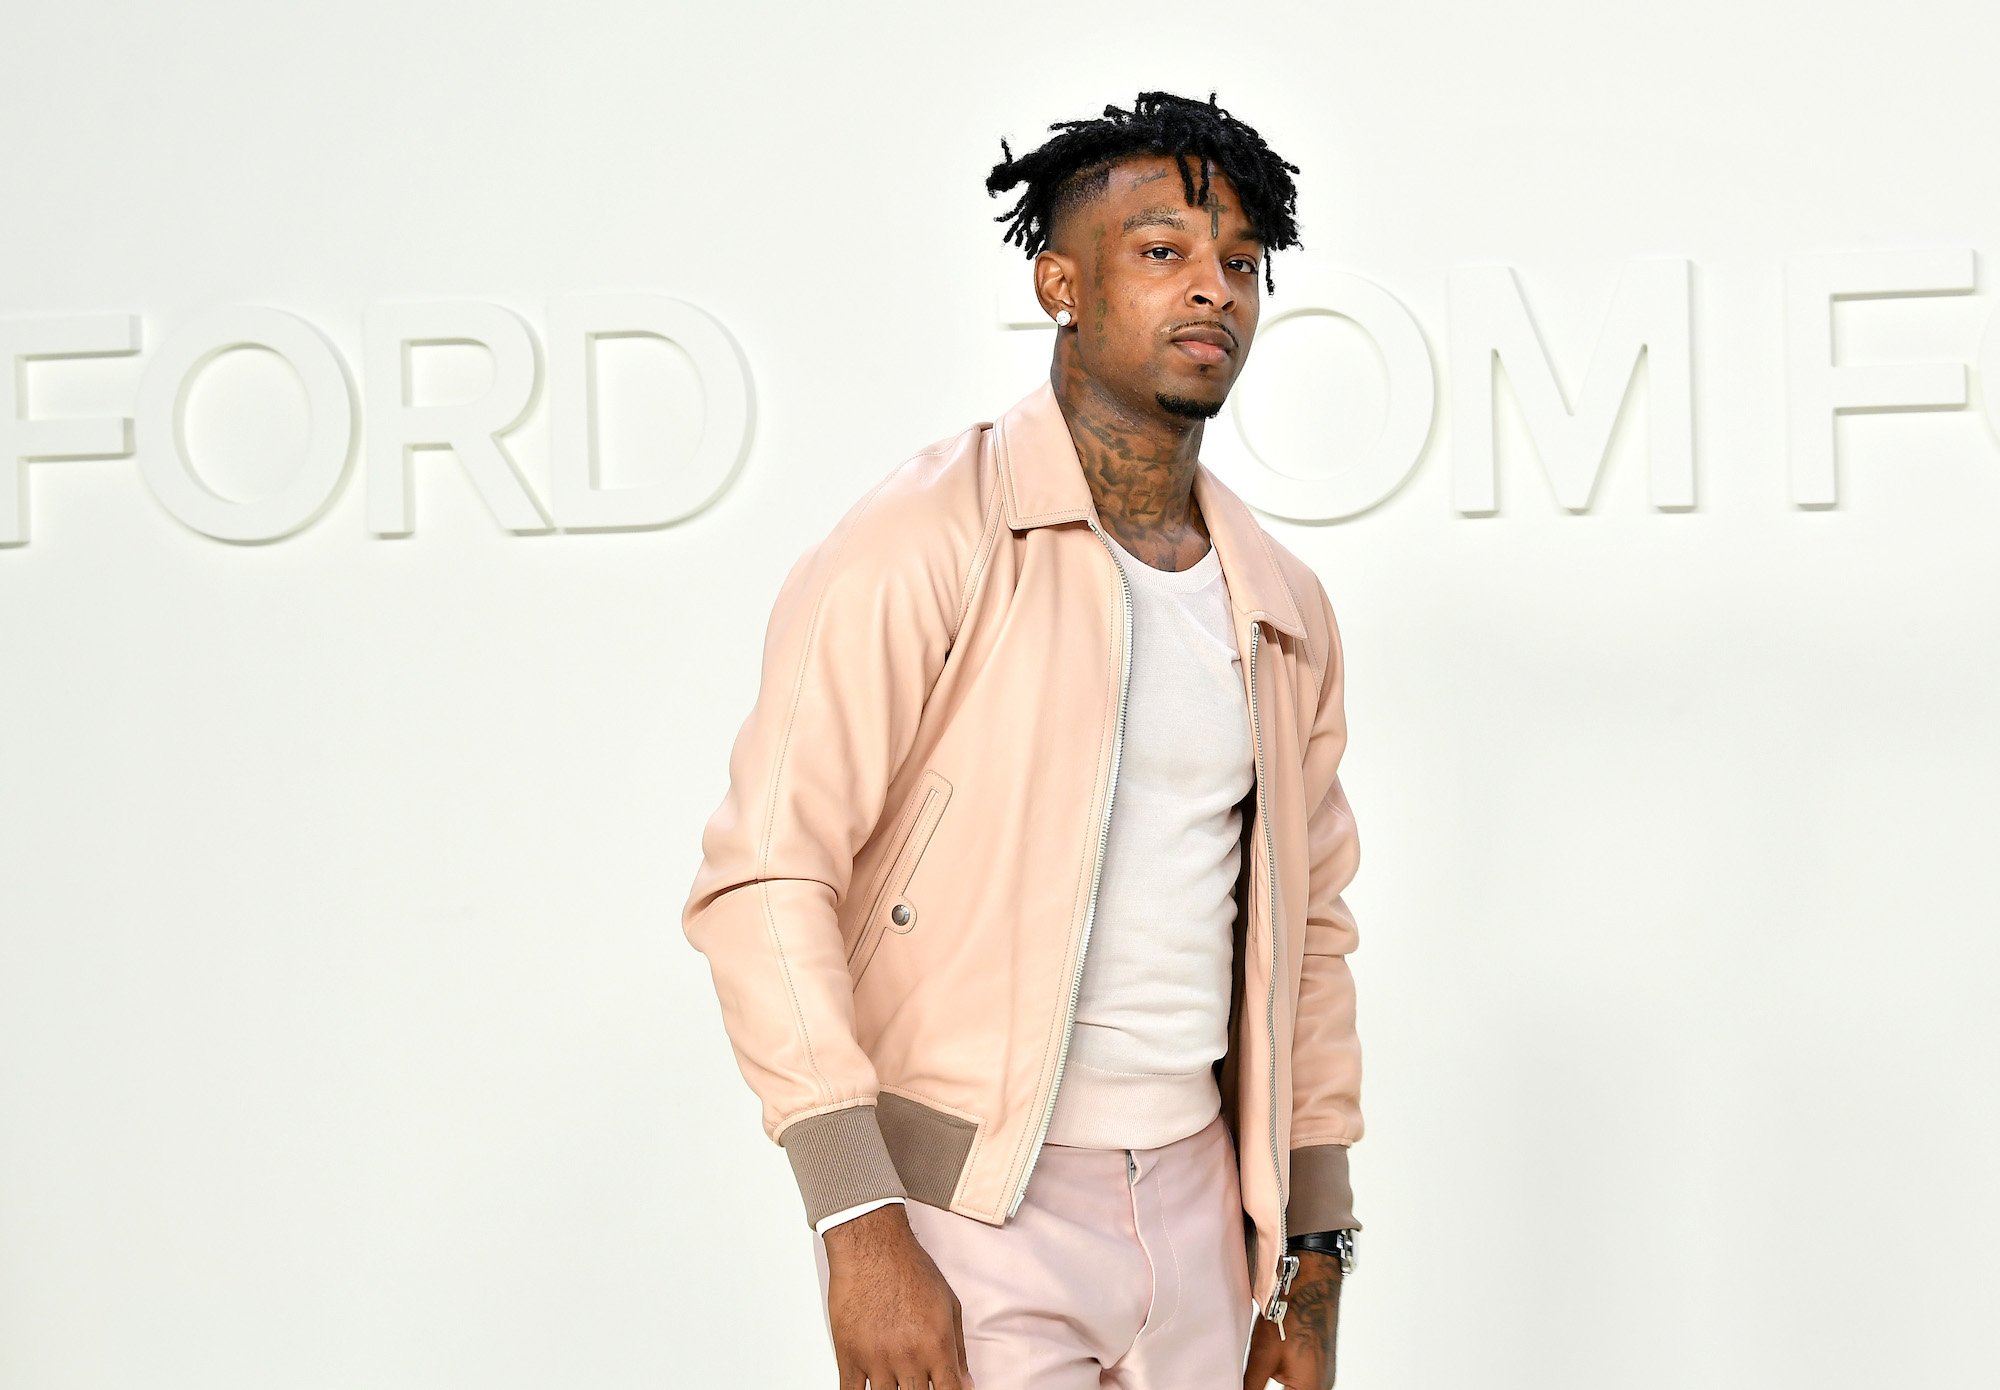 21 Savage turned slightly, looking at the camera, in front of a white background